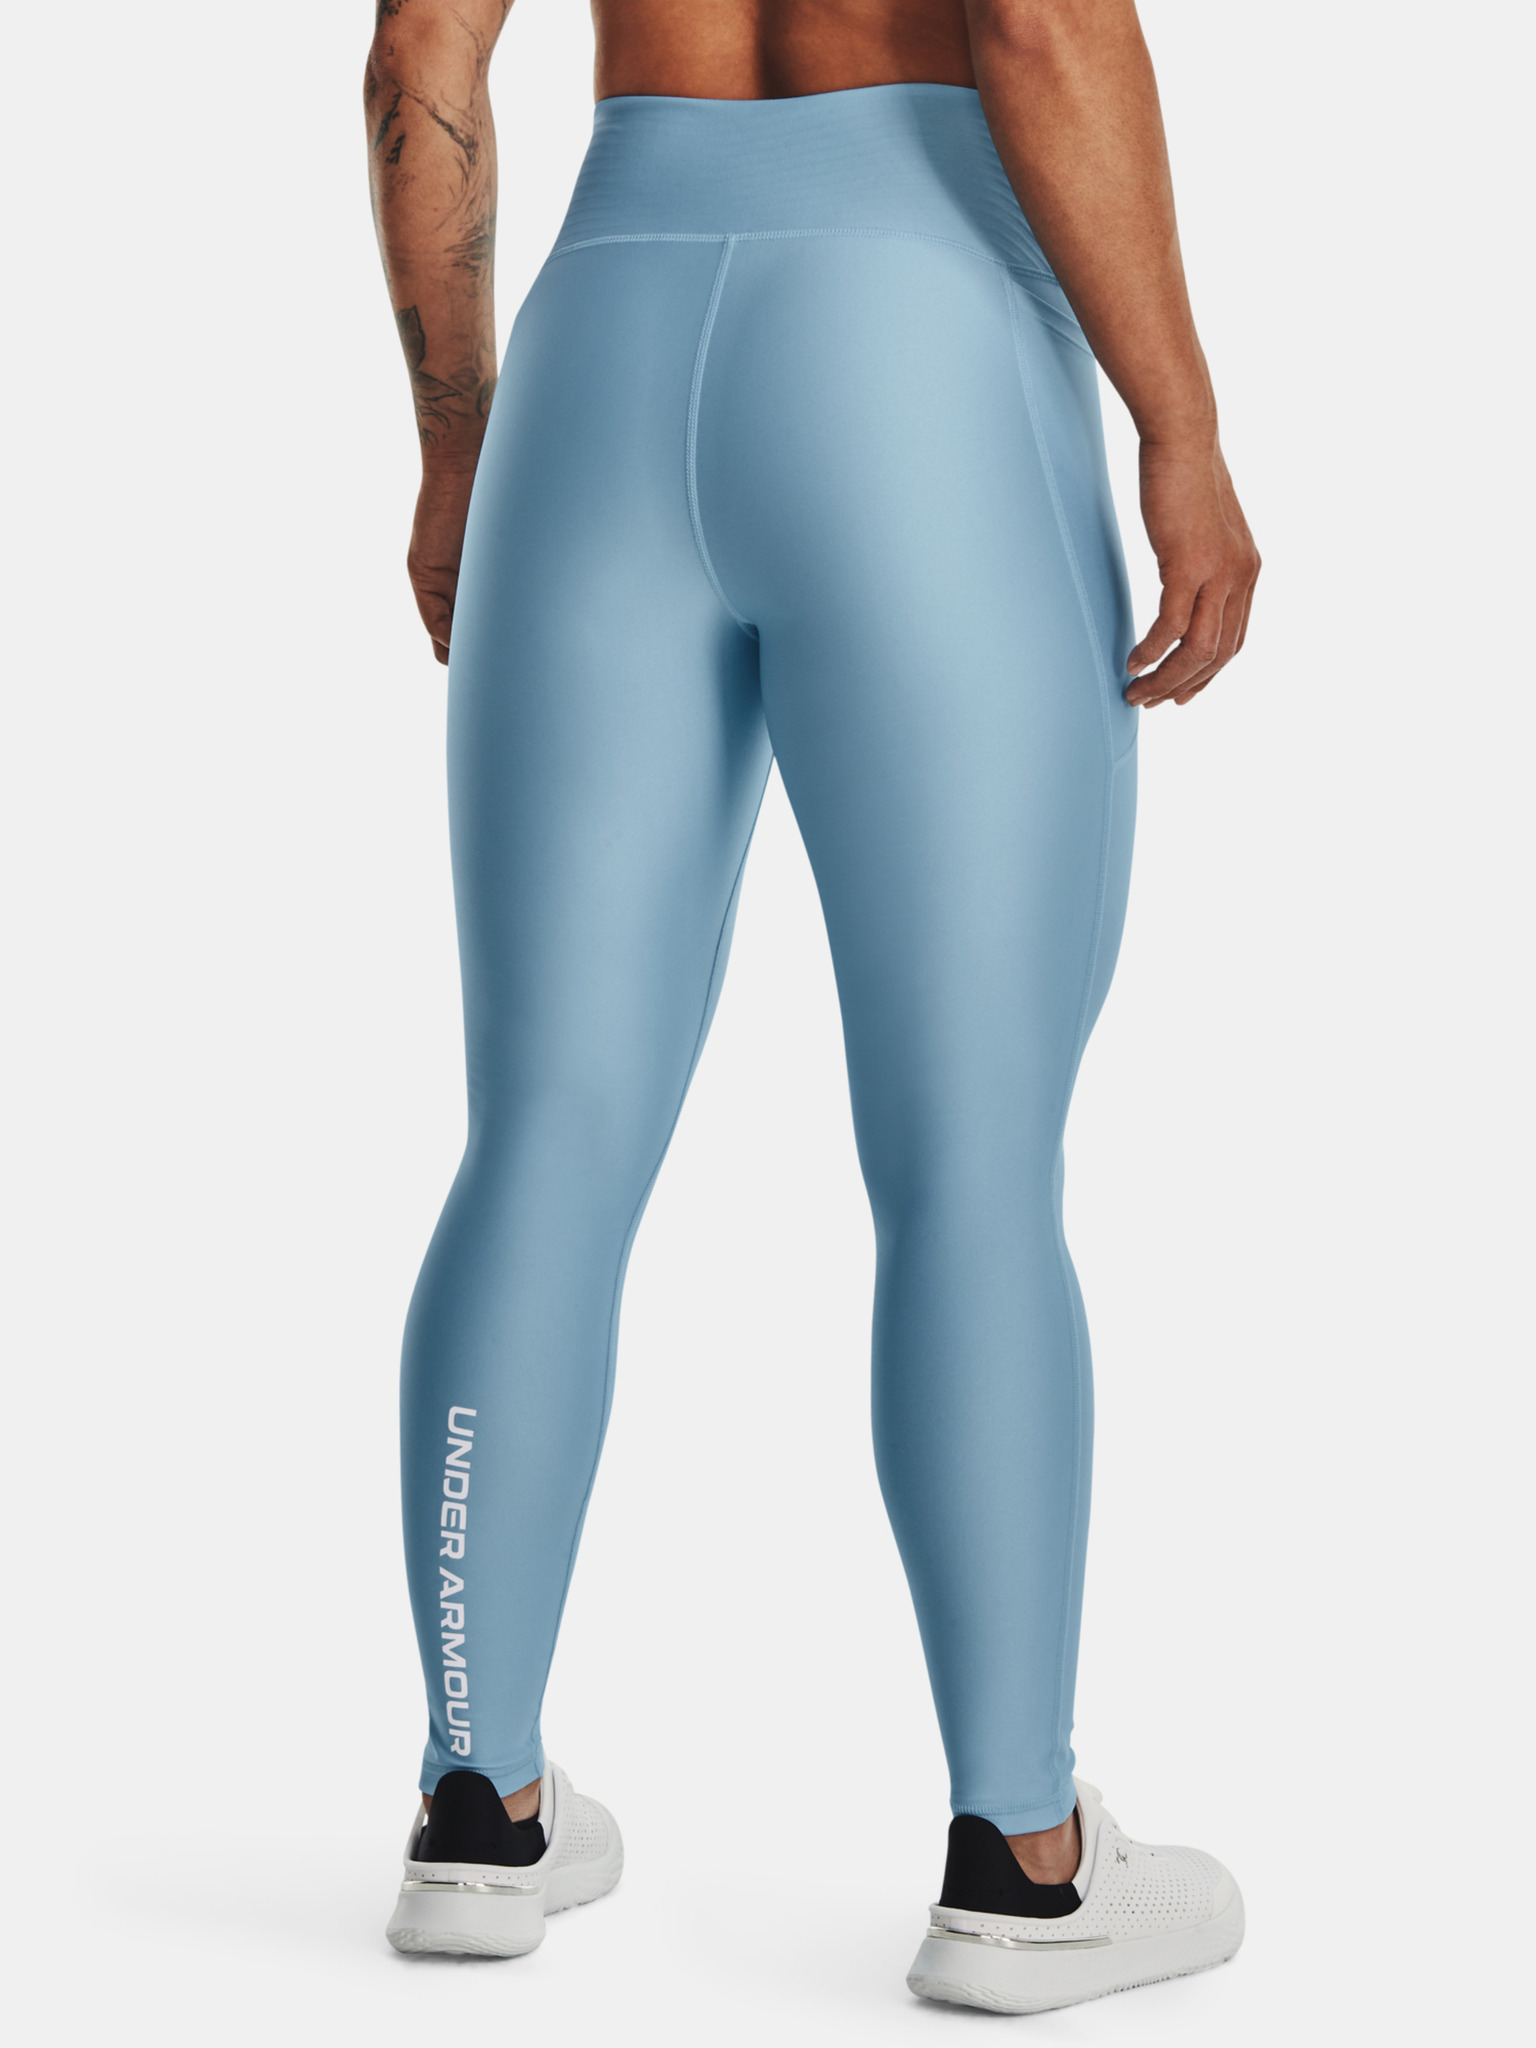 Under Armour Leggings on Sale! Great Discounts Today!